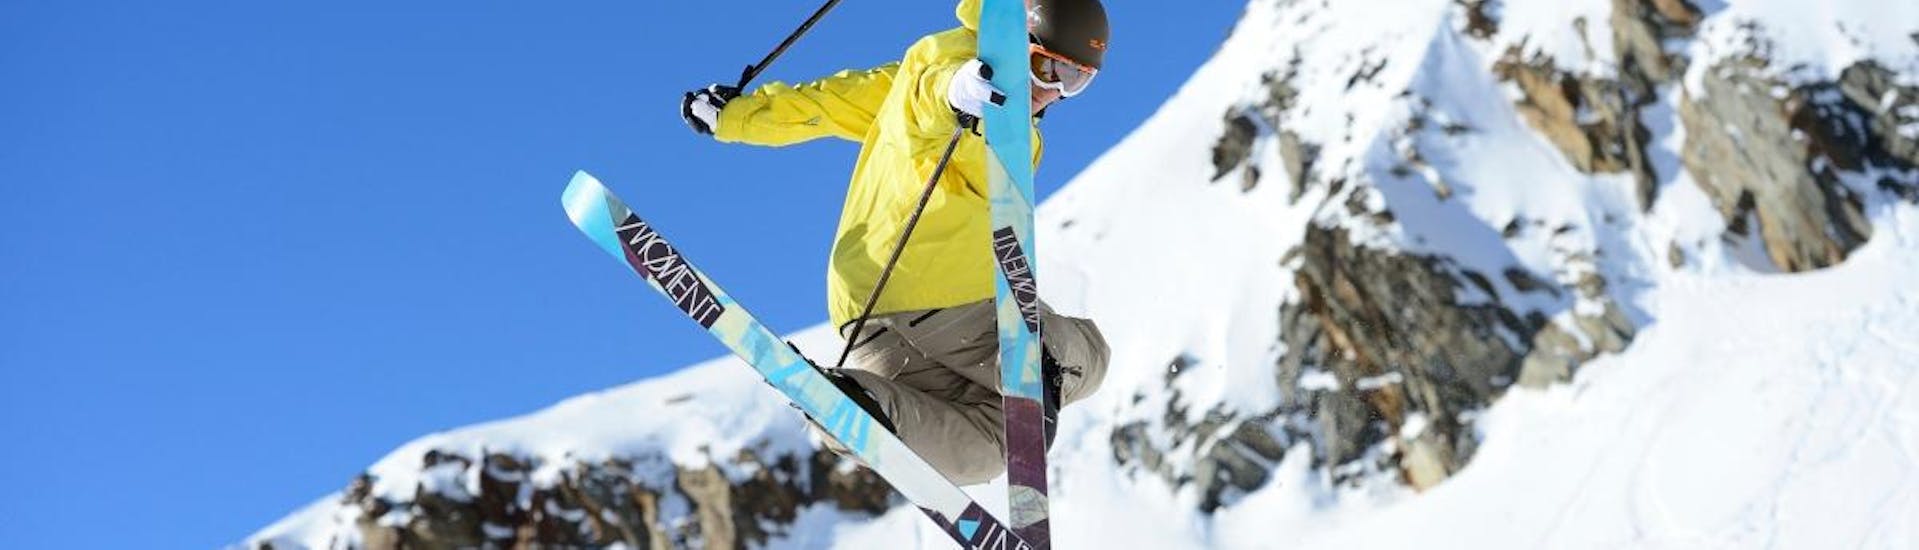 A freestyle skier is doing some tricks in the air as part of his Freestyle Ski & Snowboarding Lessons for Advanced Skiers with Swiss Ski School Grindelwald.